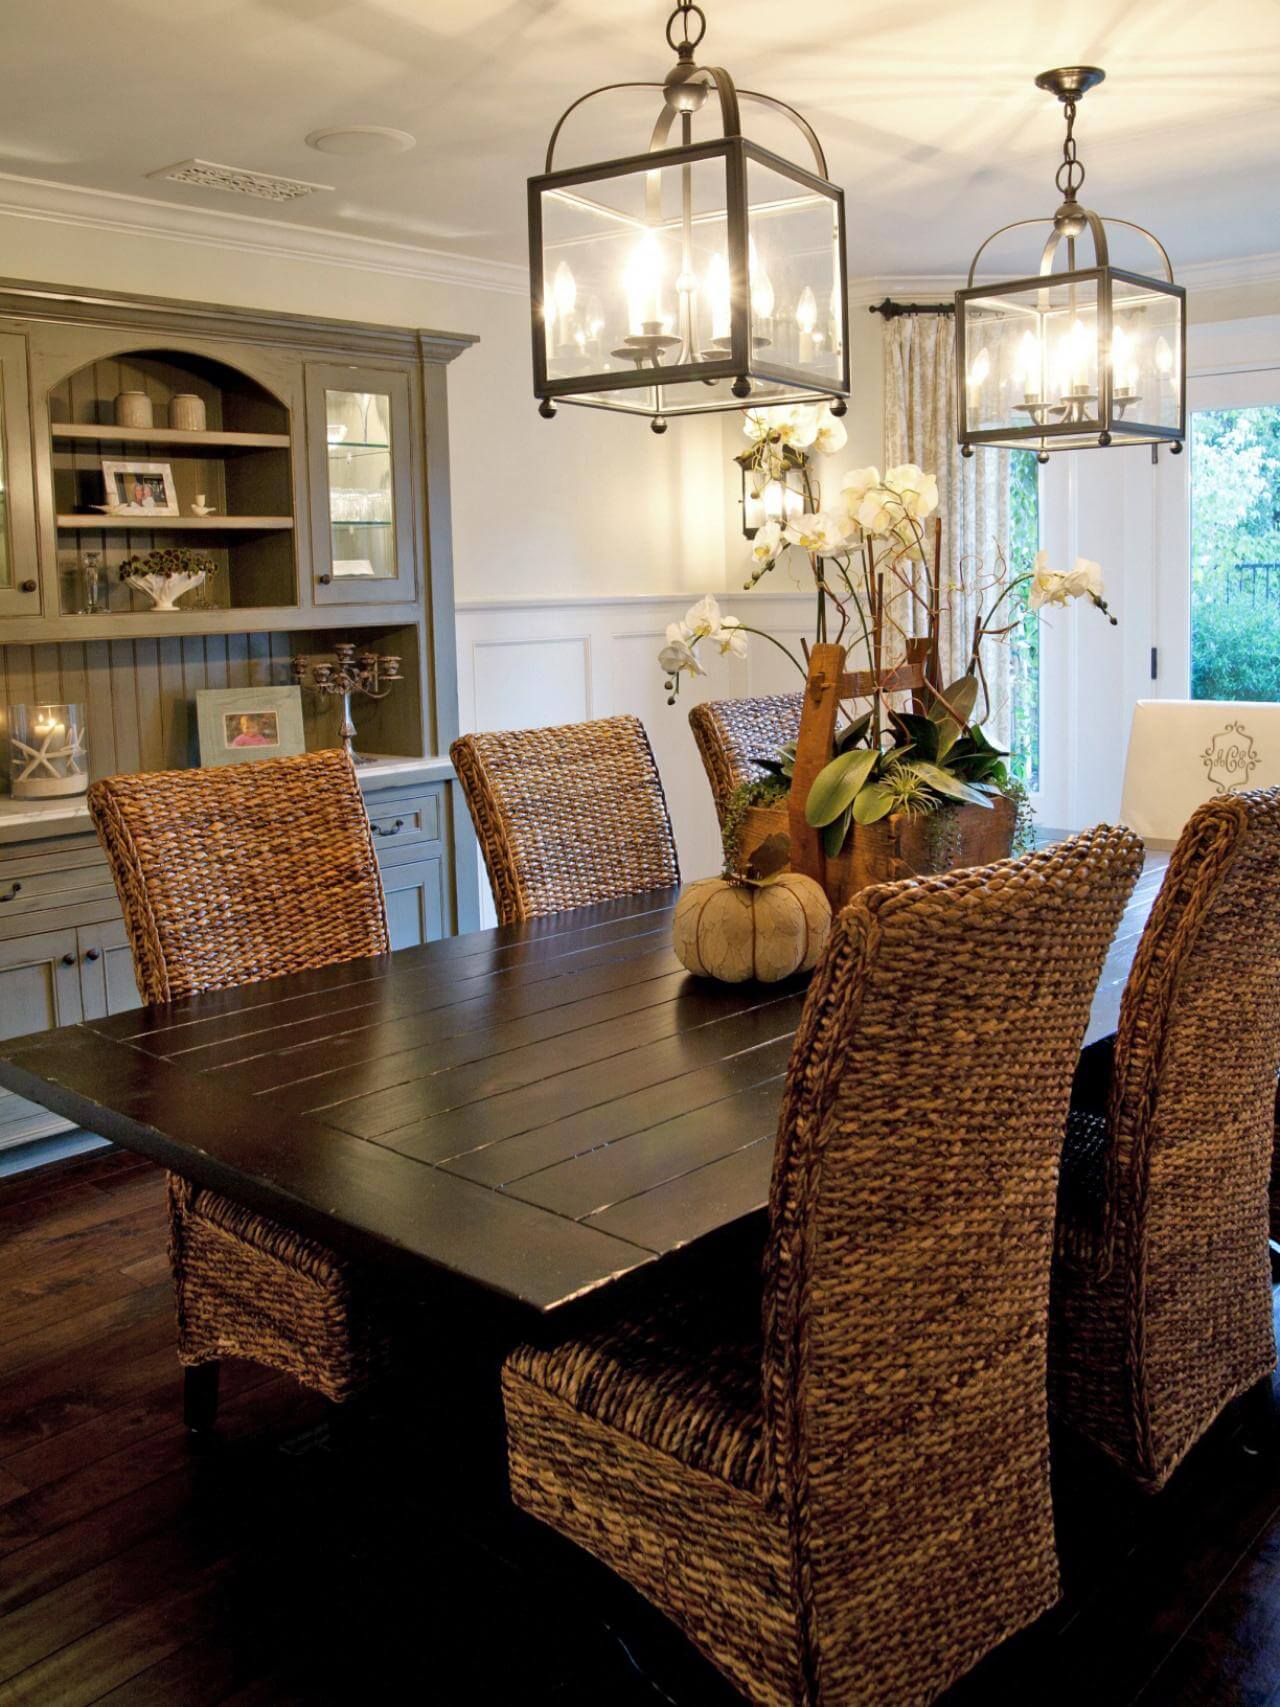 8 Unique Lighting Fixtures For A Dining Room Makeover